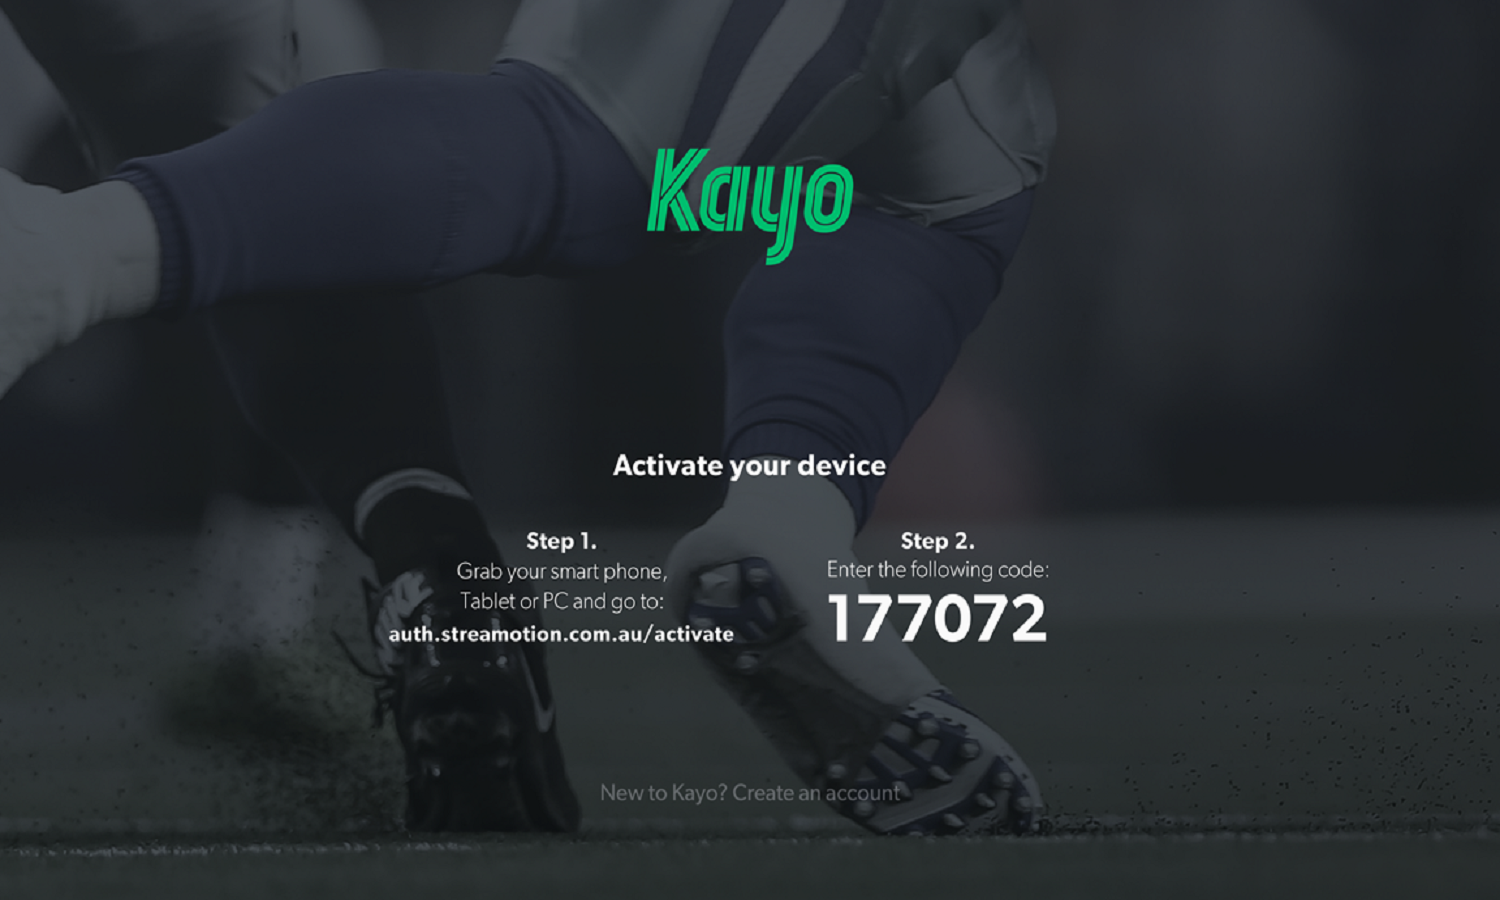 Learn How To Activate Kayo On Your Device Easily?